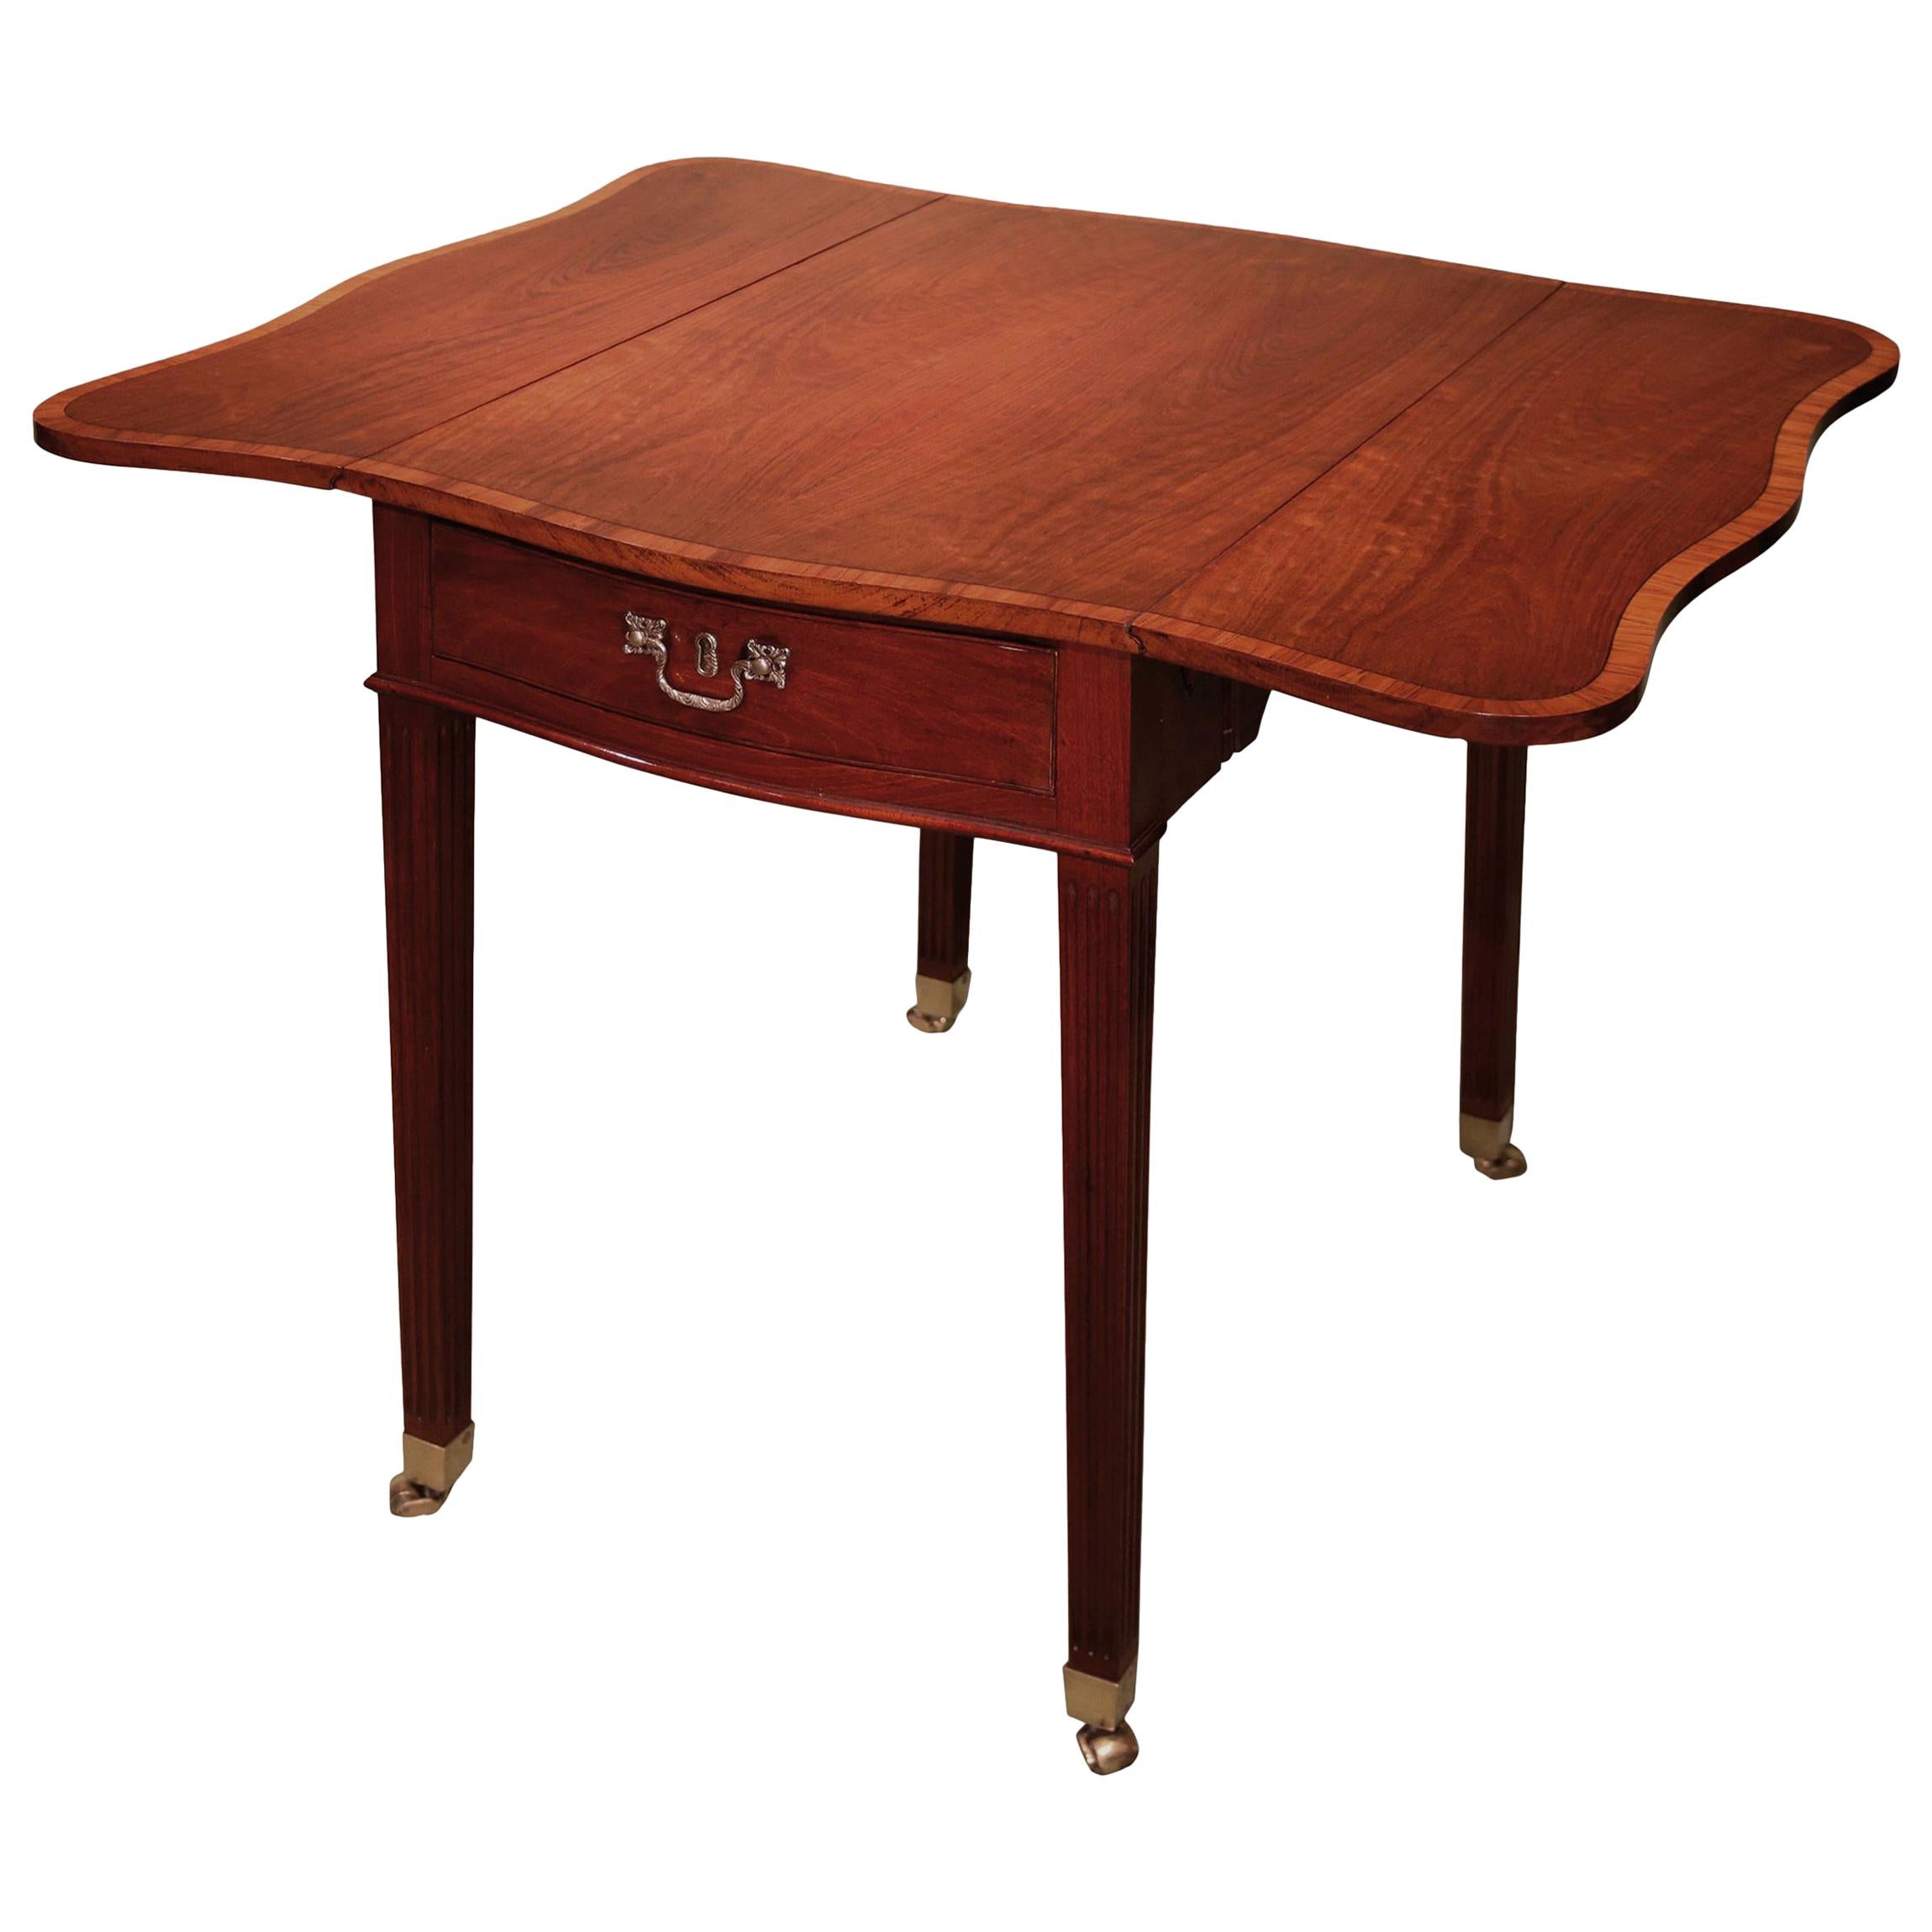 18th Century George III period mahogany pembroke table, with butterfly leaves